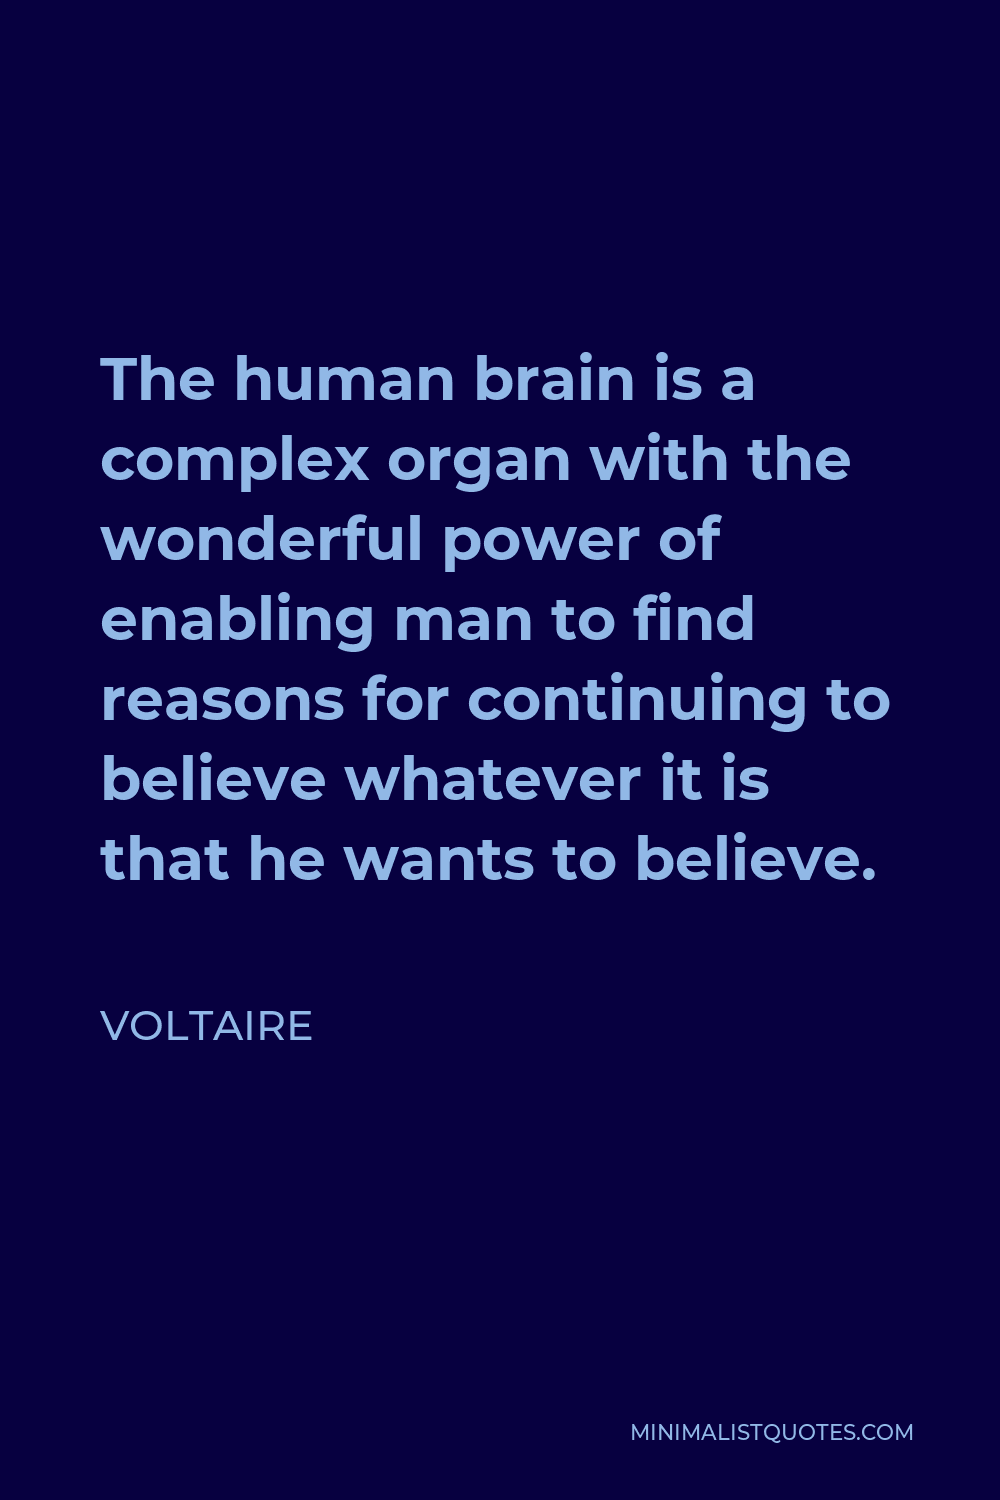 Voltaire Quote - The human brain is a complex organ with the wonderful power of enabling man to find reasons for continuing to believe whatever it is that he wants to believe.